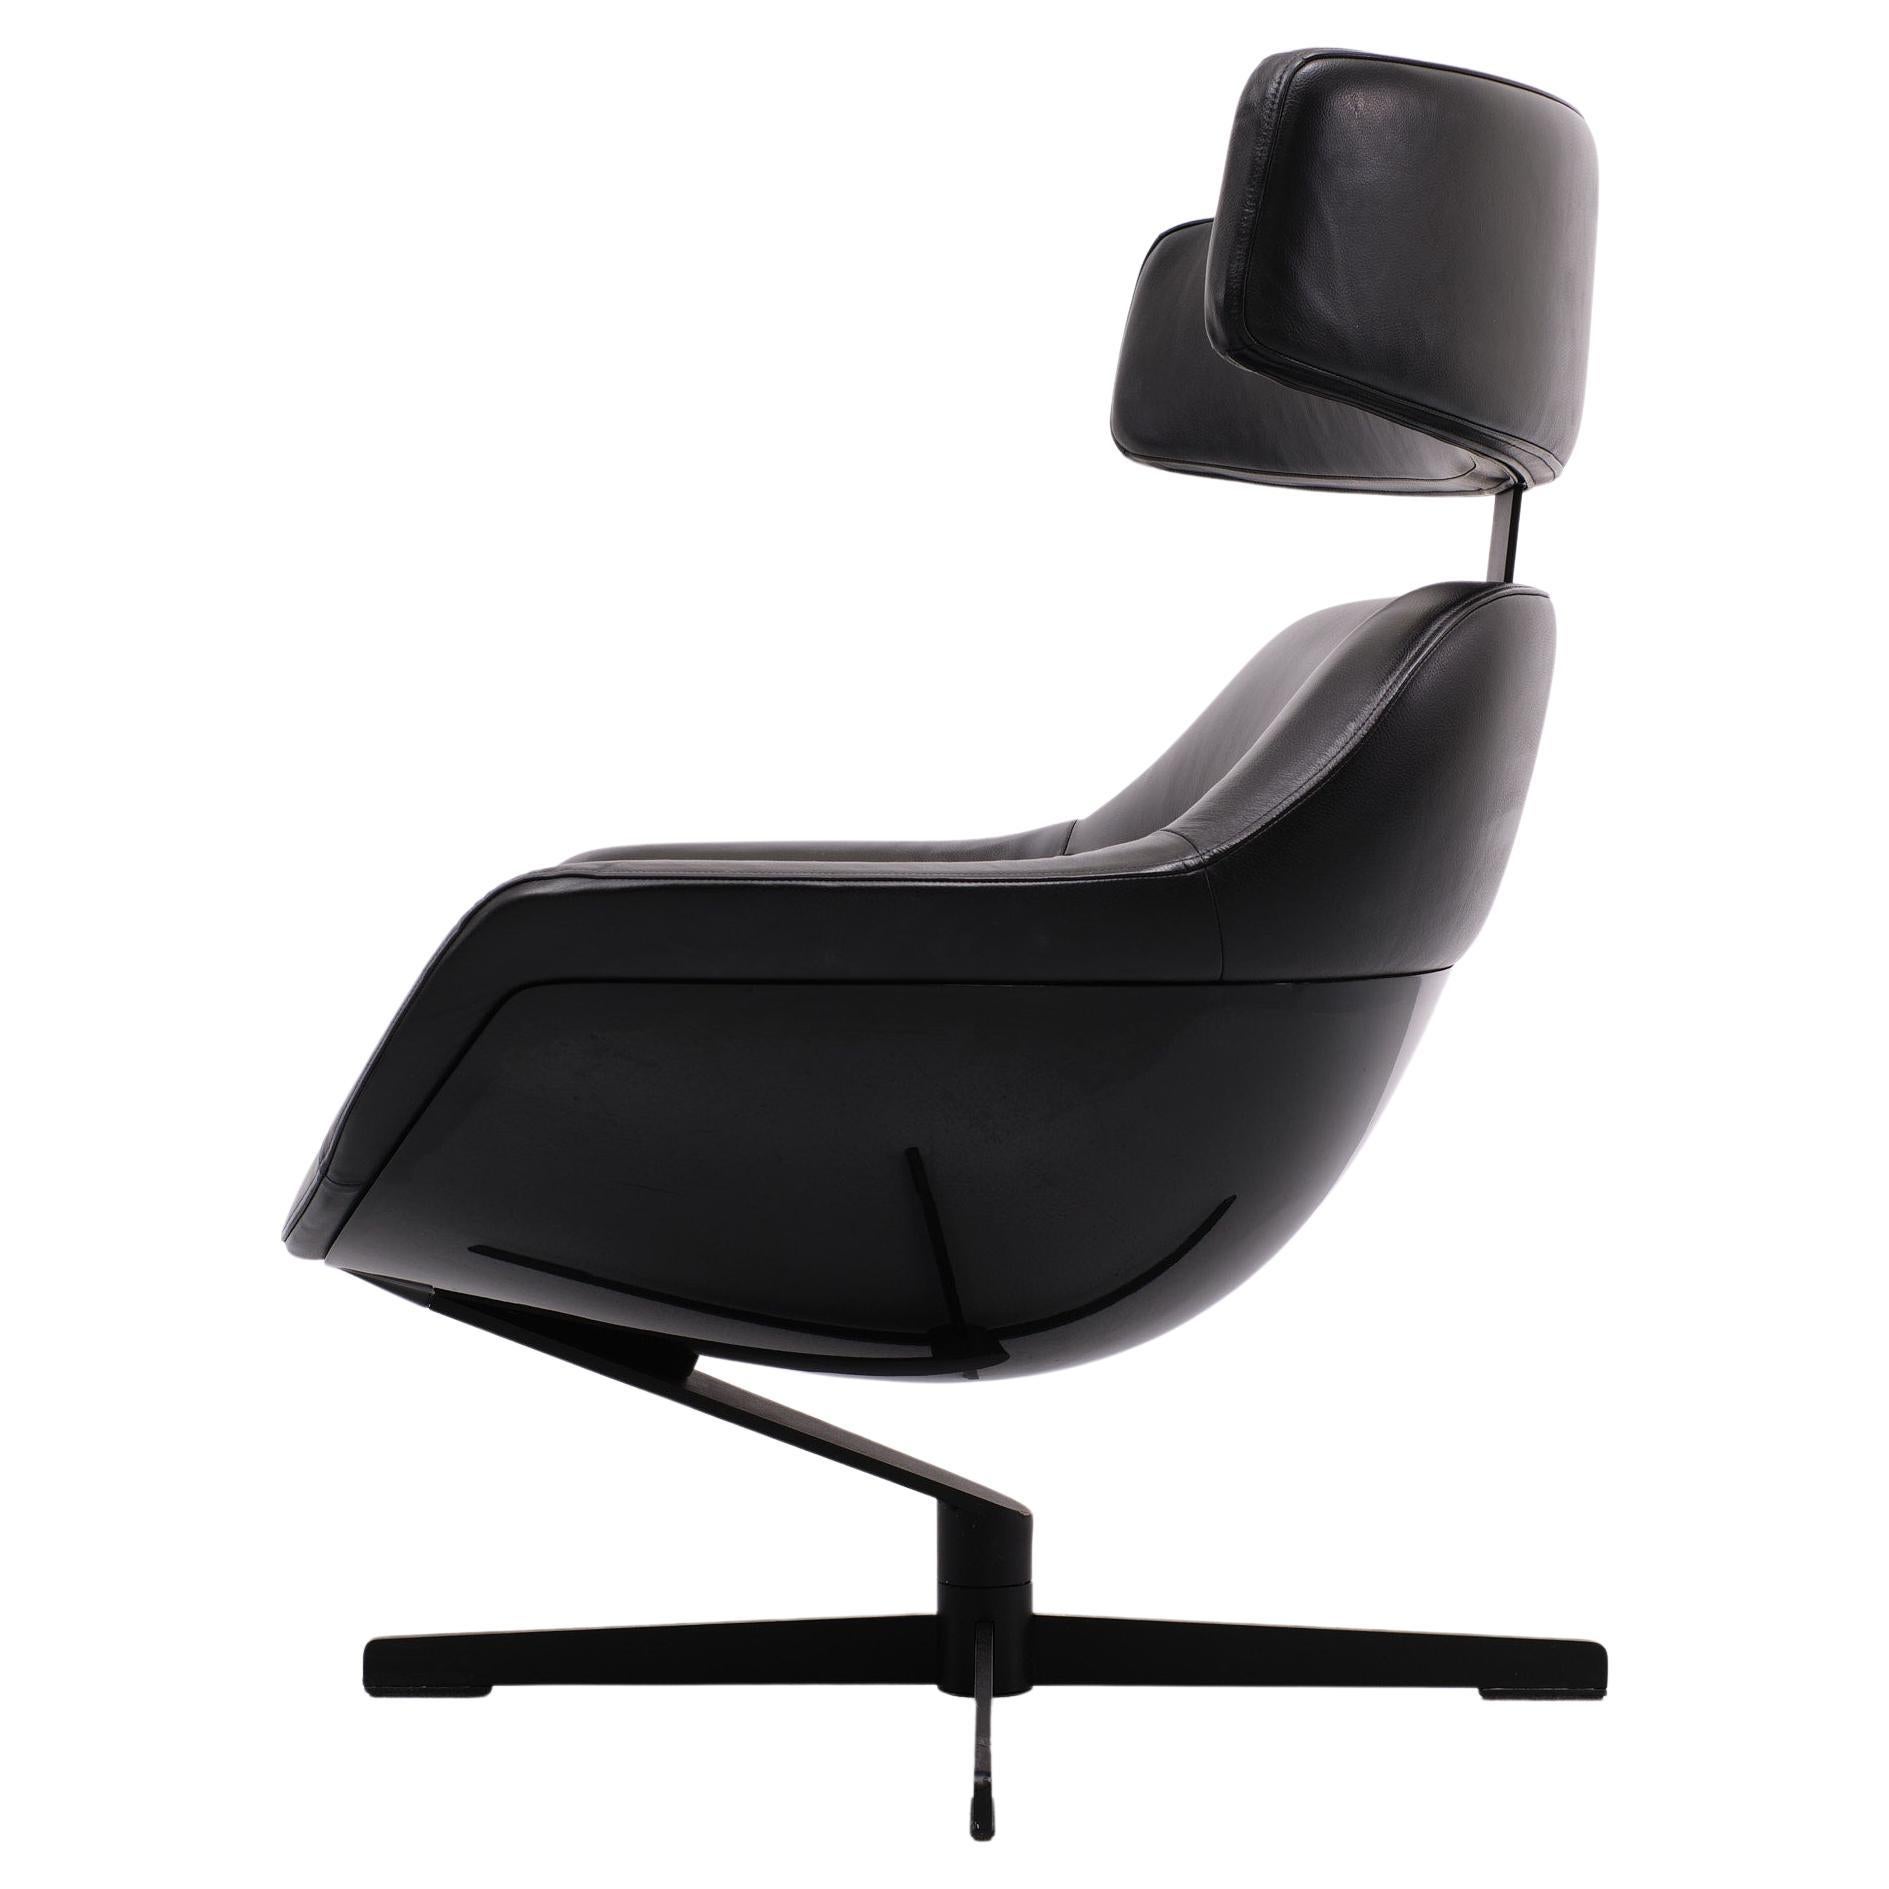 The 277 Auckland lounge chair  designed by Jean Marie Massaud for Cassina  2005
The Auckland lounge chair provide well-balanced comfort in lobbies, lounges, and meeting rooms. very futuristic and space age looking chair  .The chair has a swivel